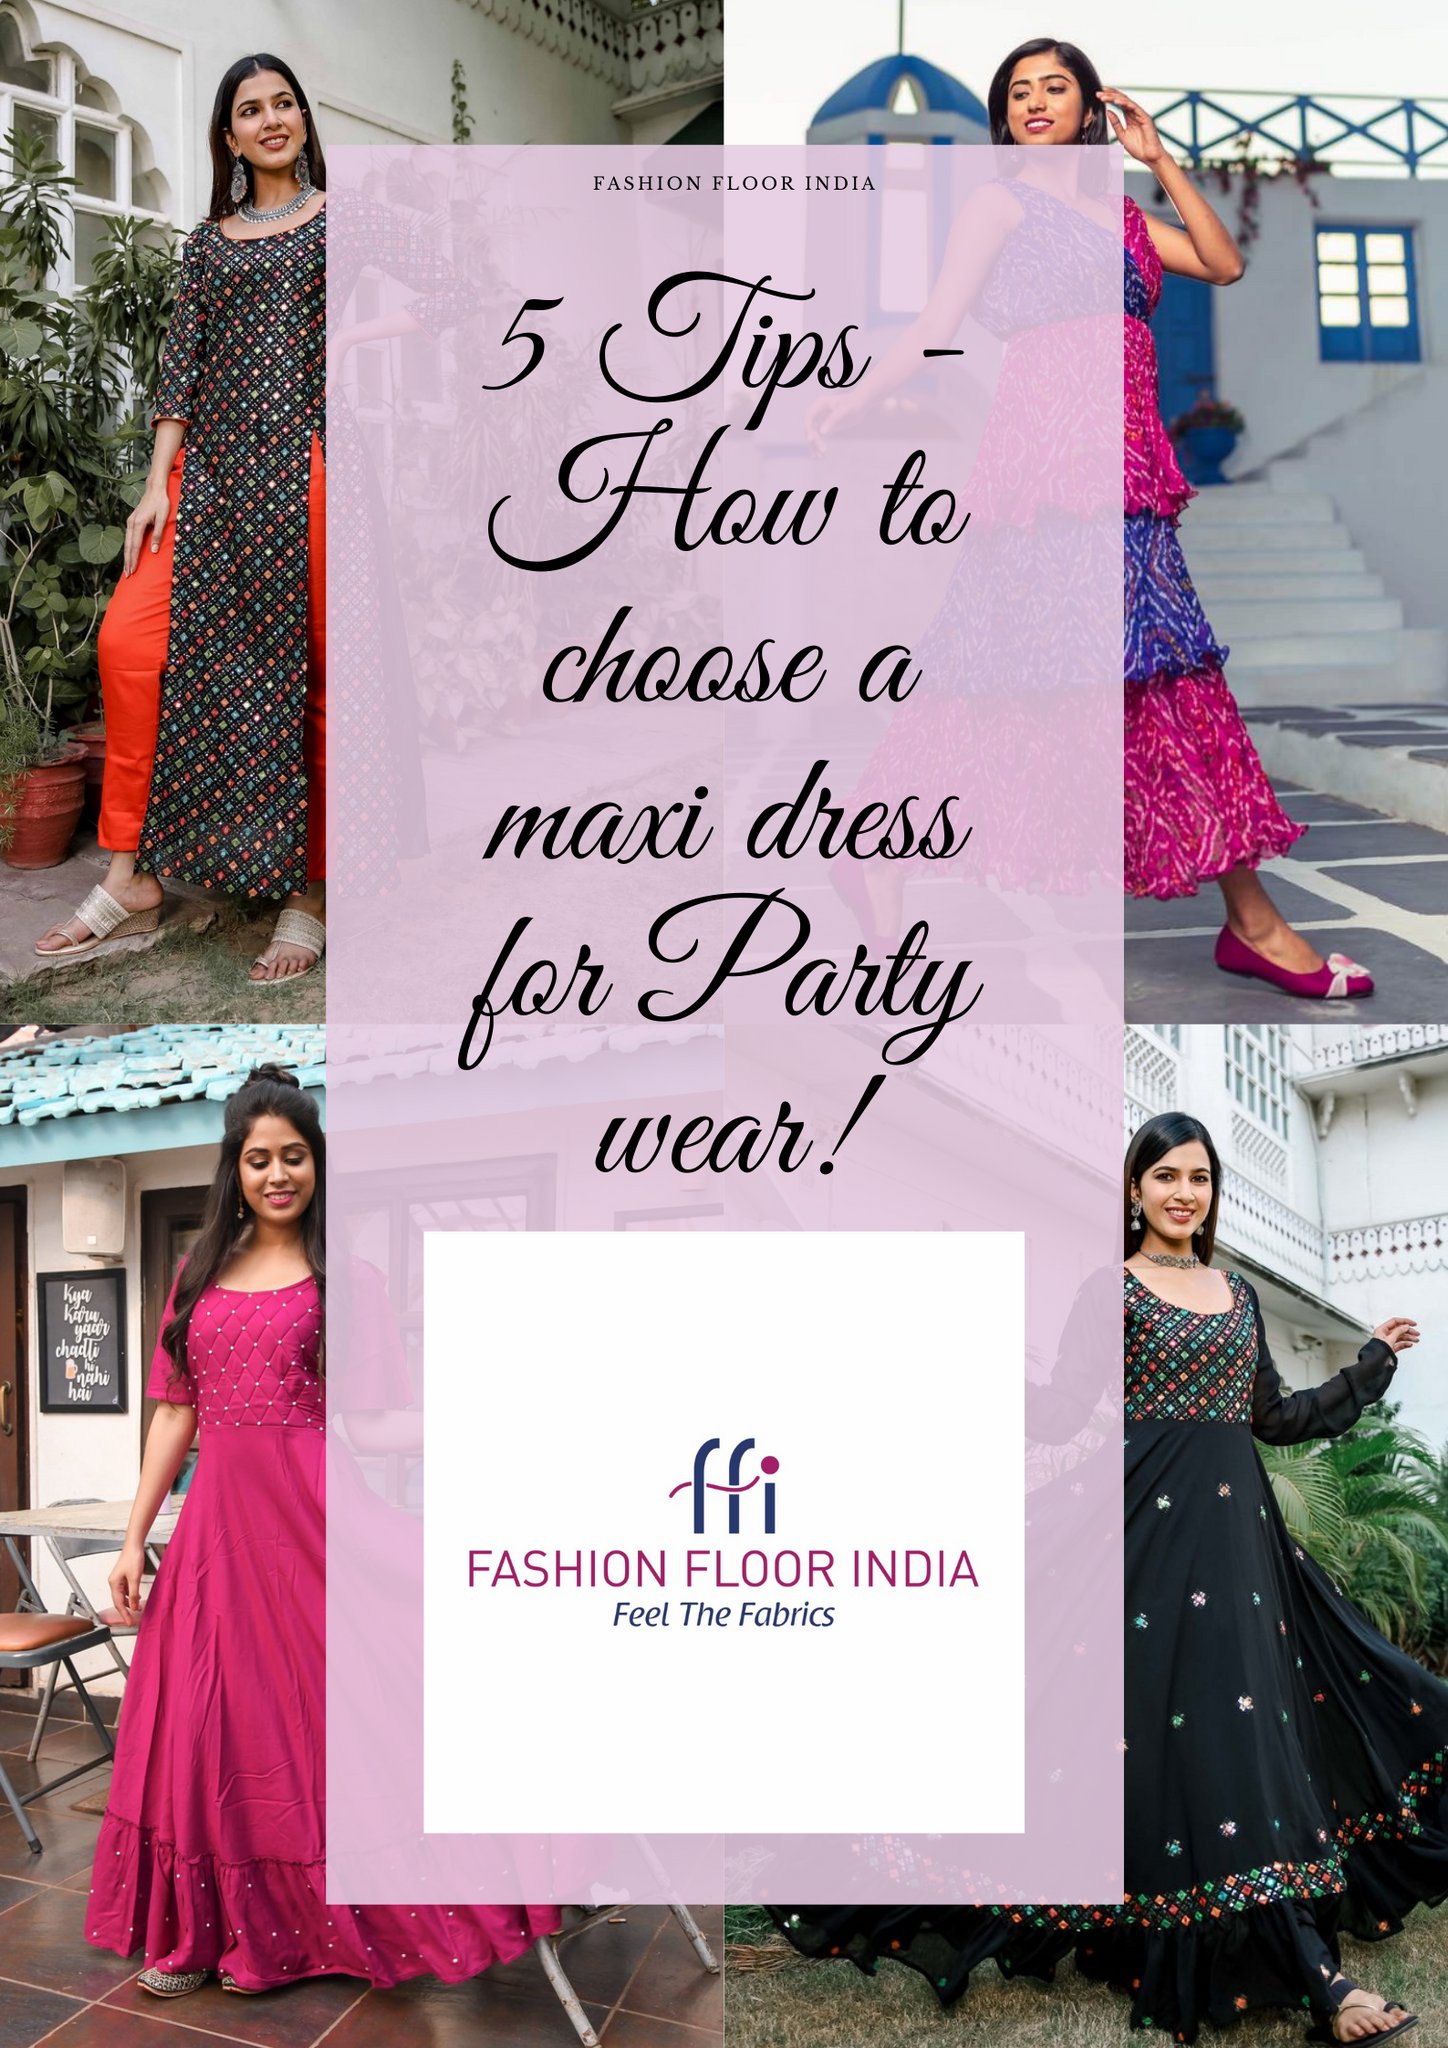 5 Tips - How to choose a maxi dress for Party wear!